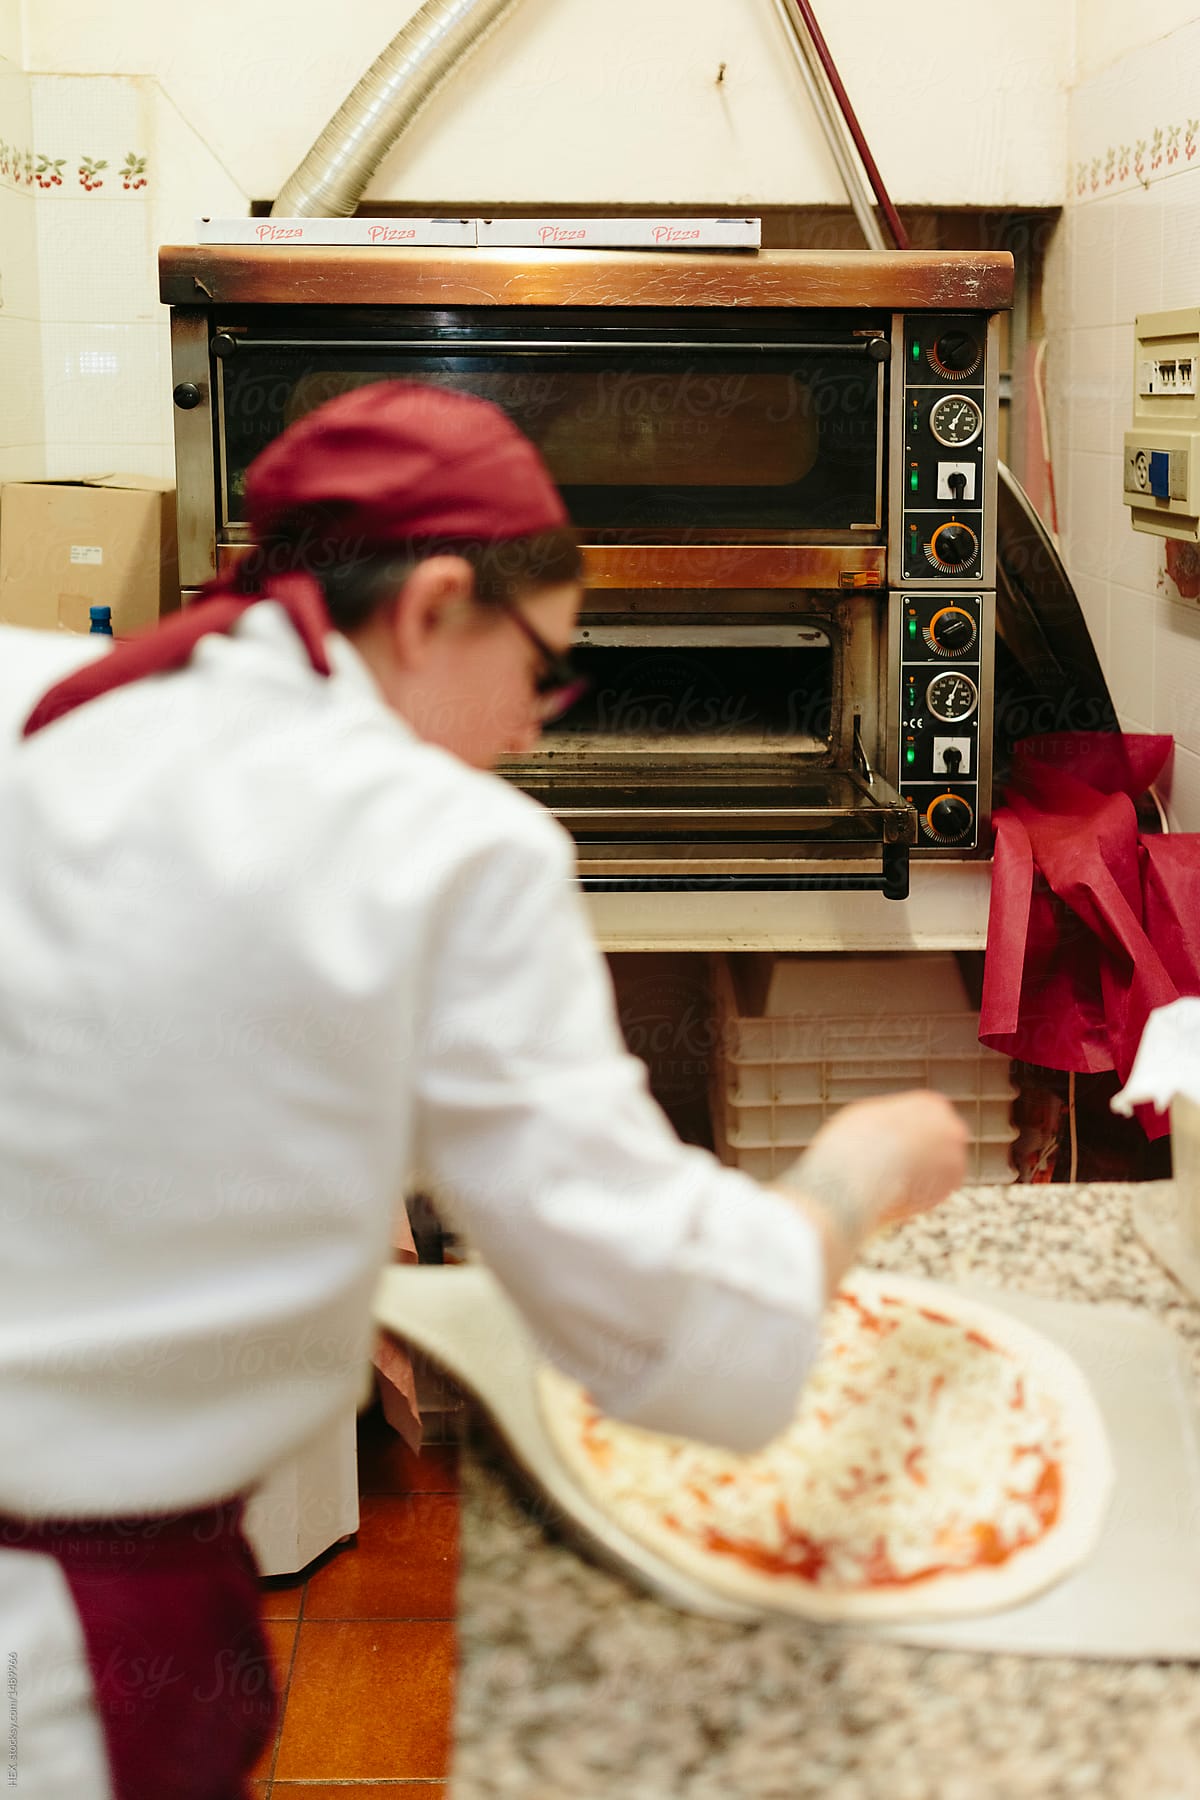 Female Pizza Chef Working in a Restaurant Kitchen. Small Busines